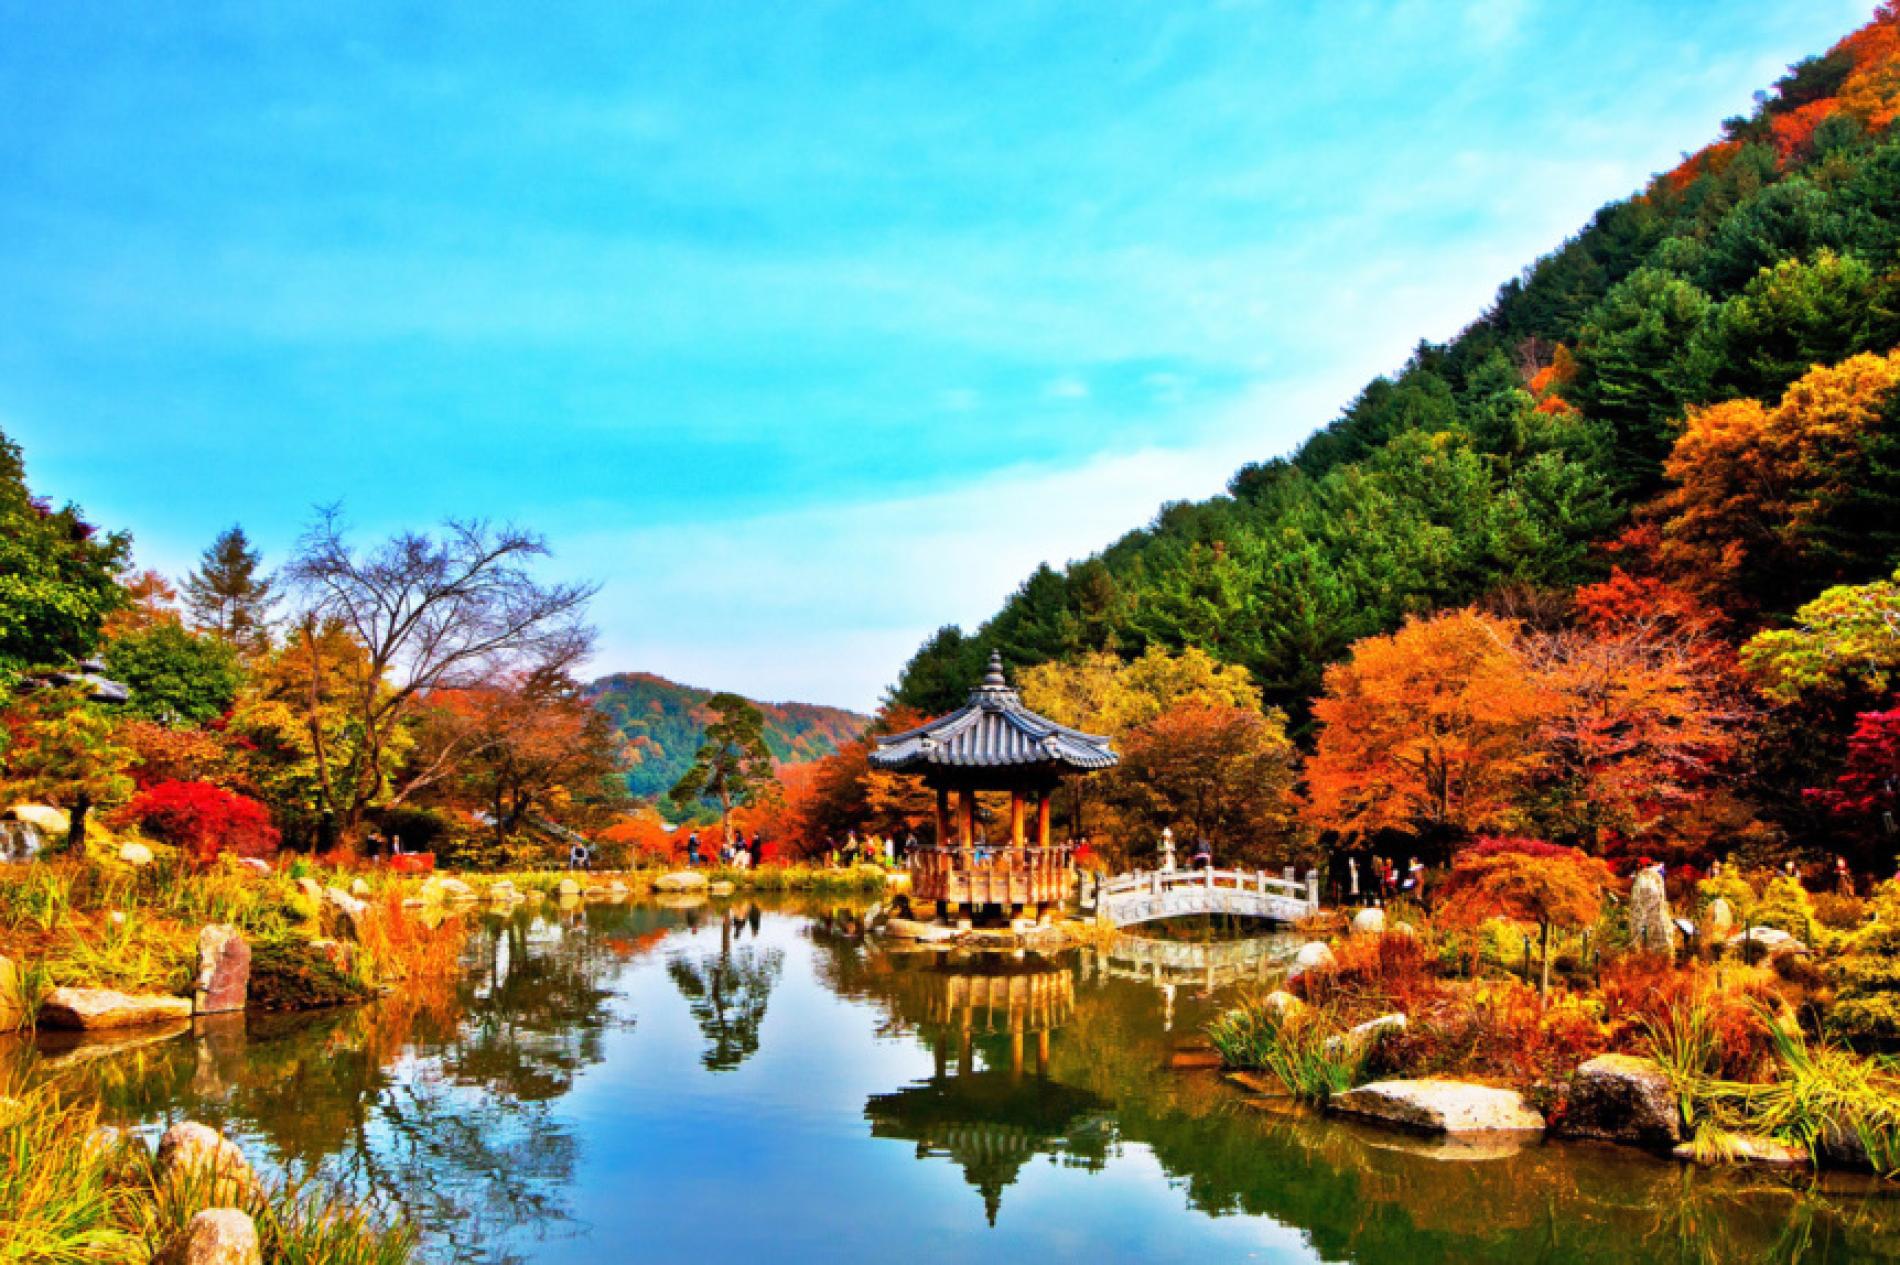 Nami Island: A Whimsical Wonderland in the Heart of South Korea